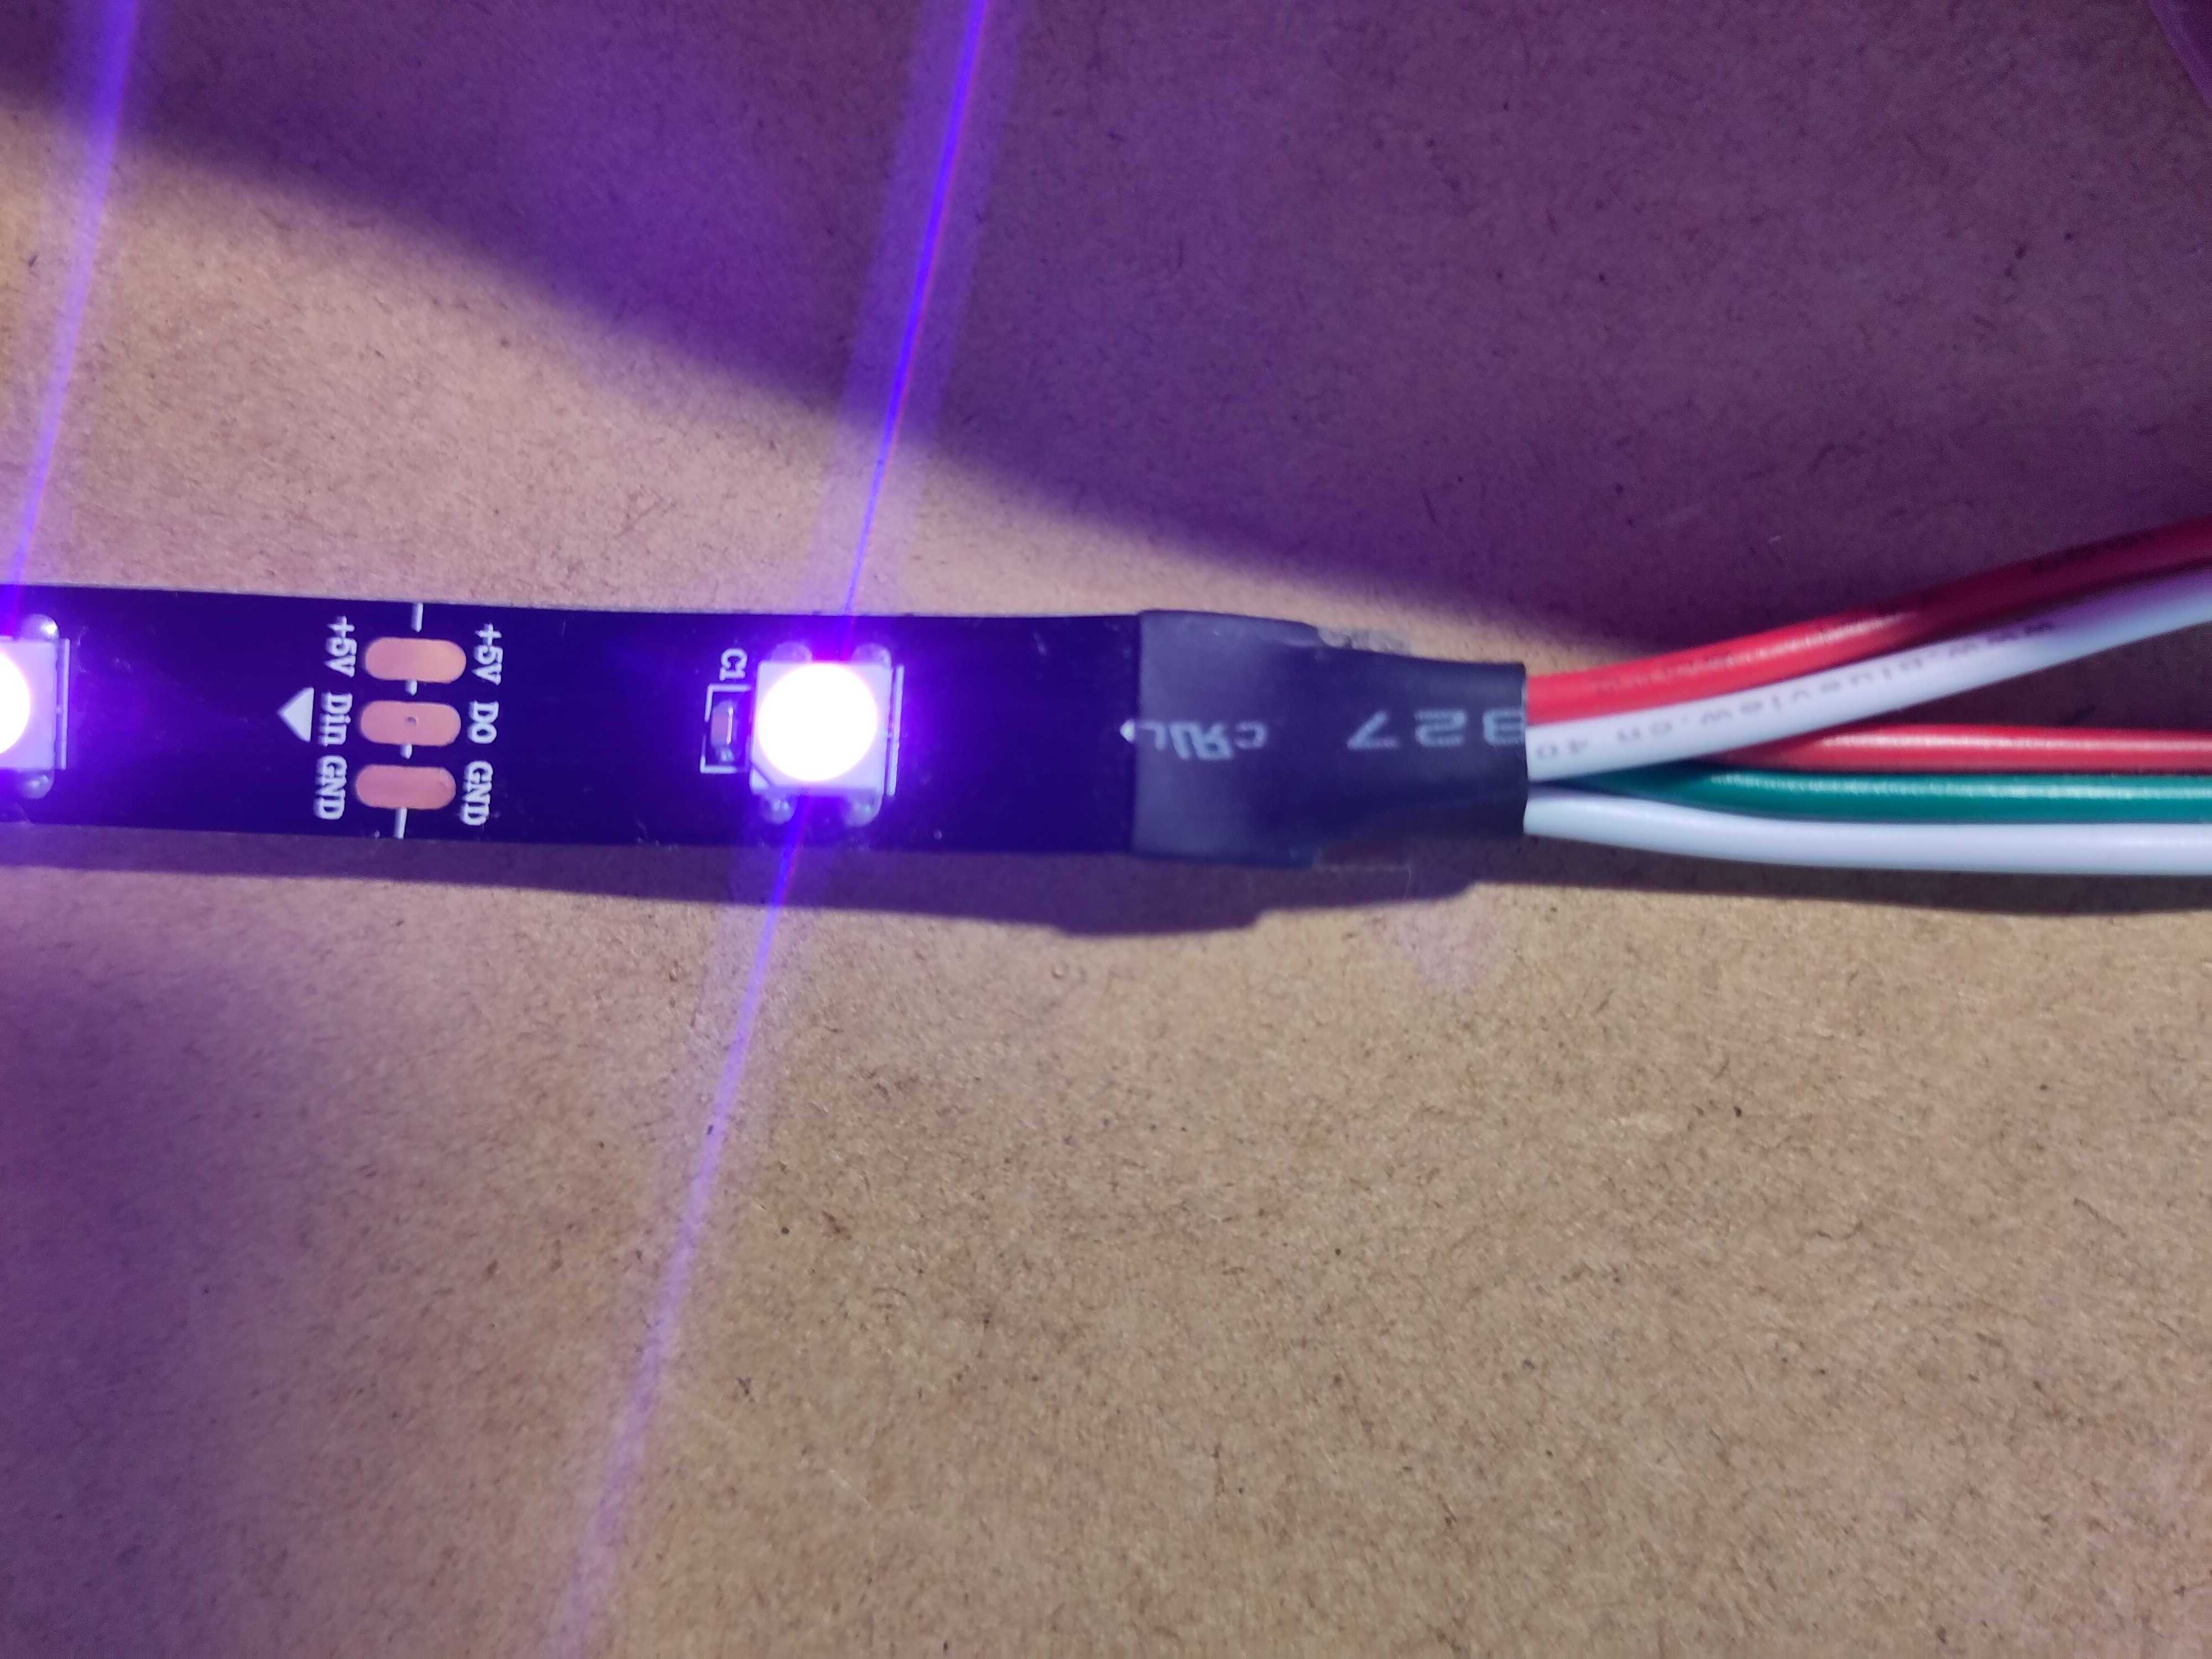 LED strip with three connections for power, ground, and data